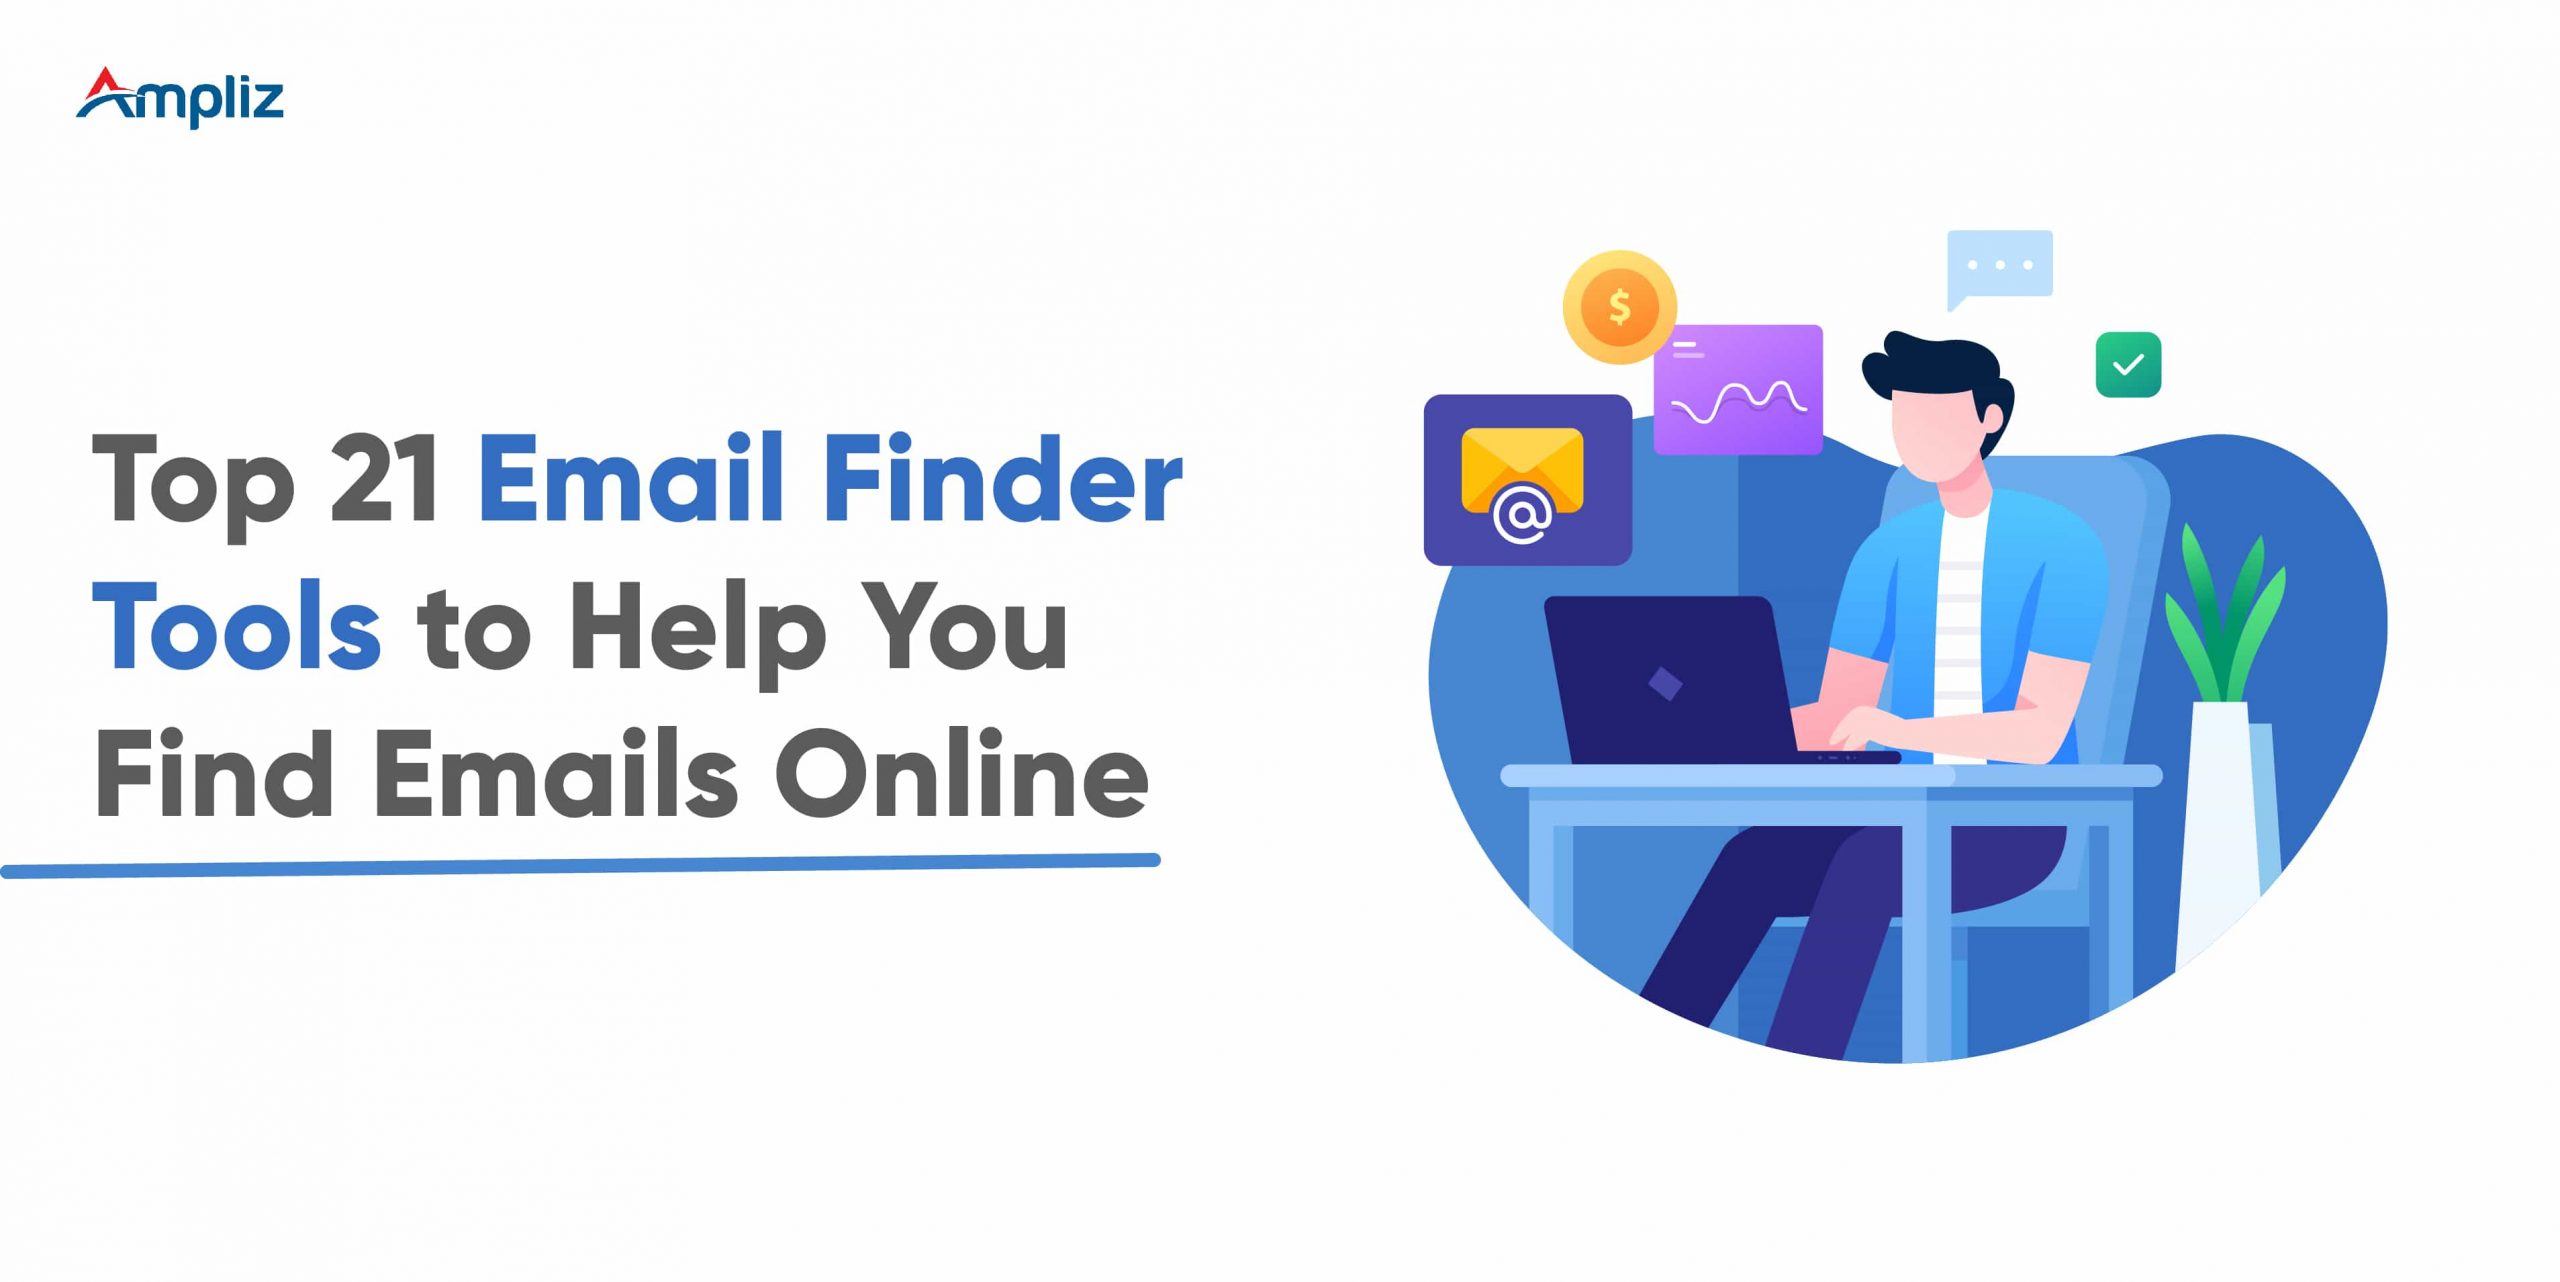 Top 21 Email Finder Tools to Help You Find Emails Online